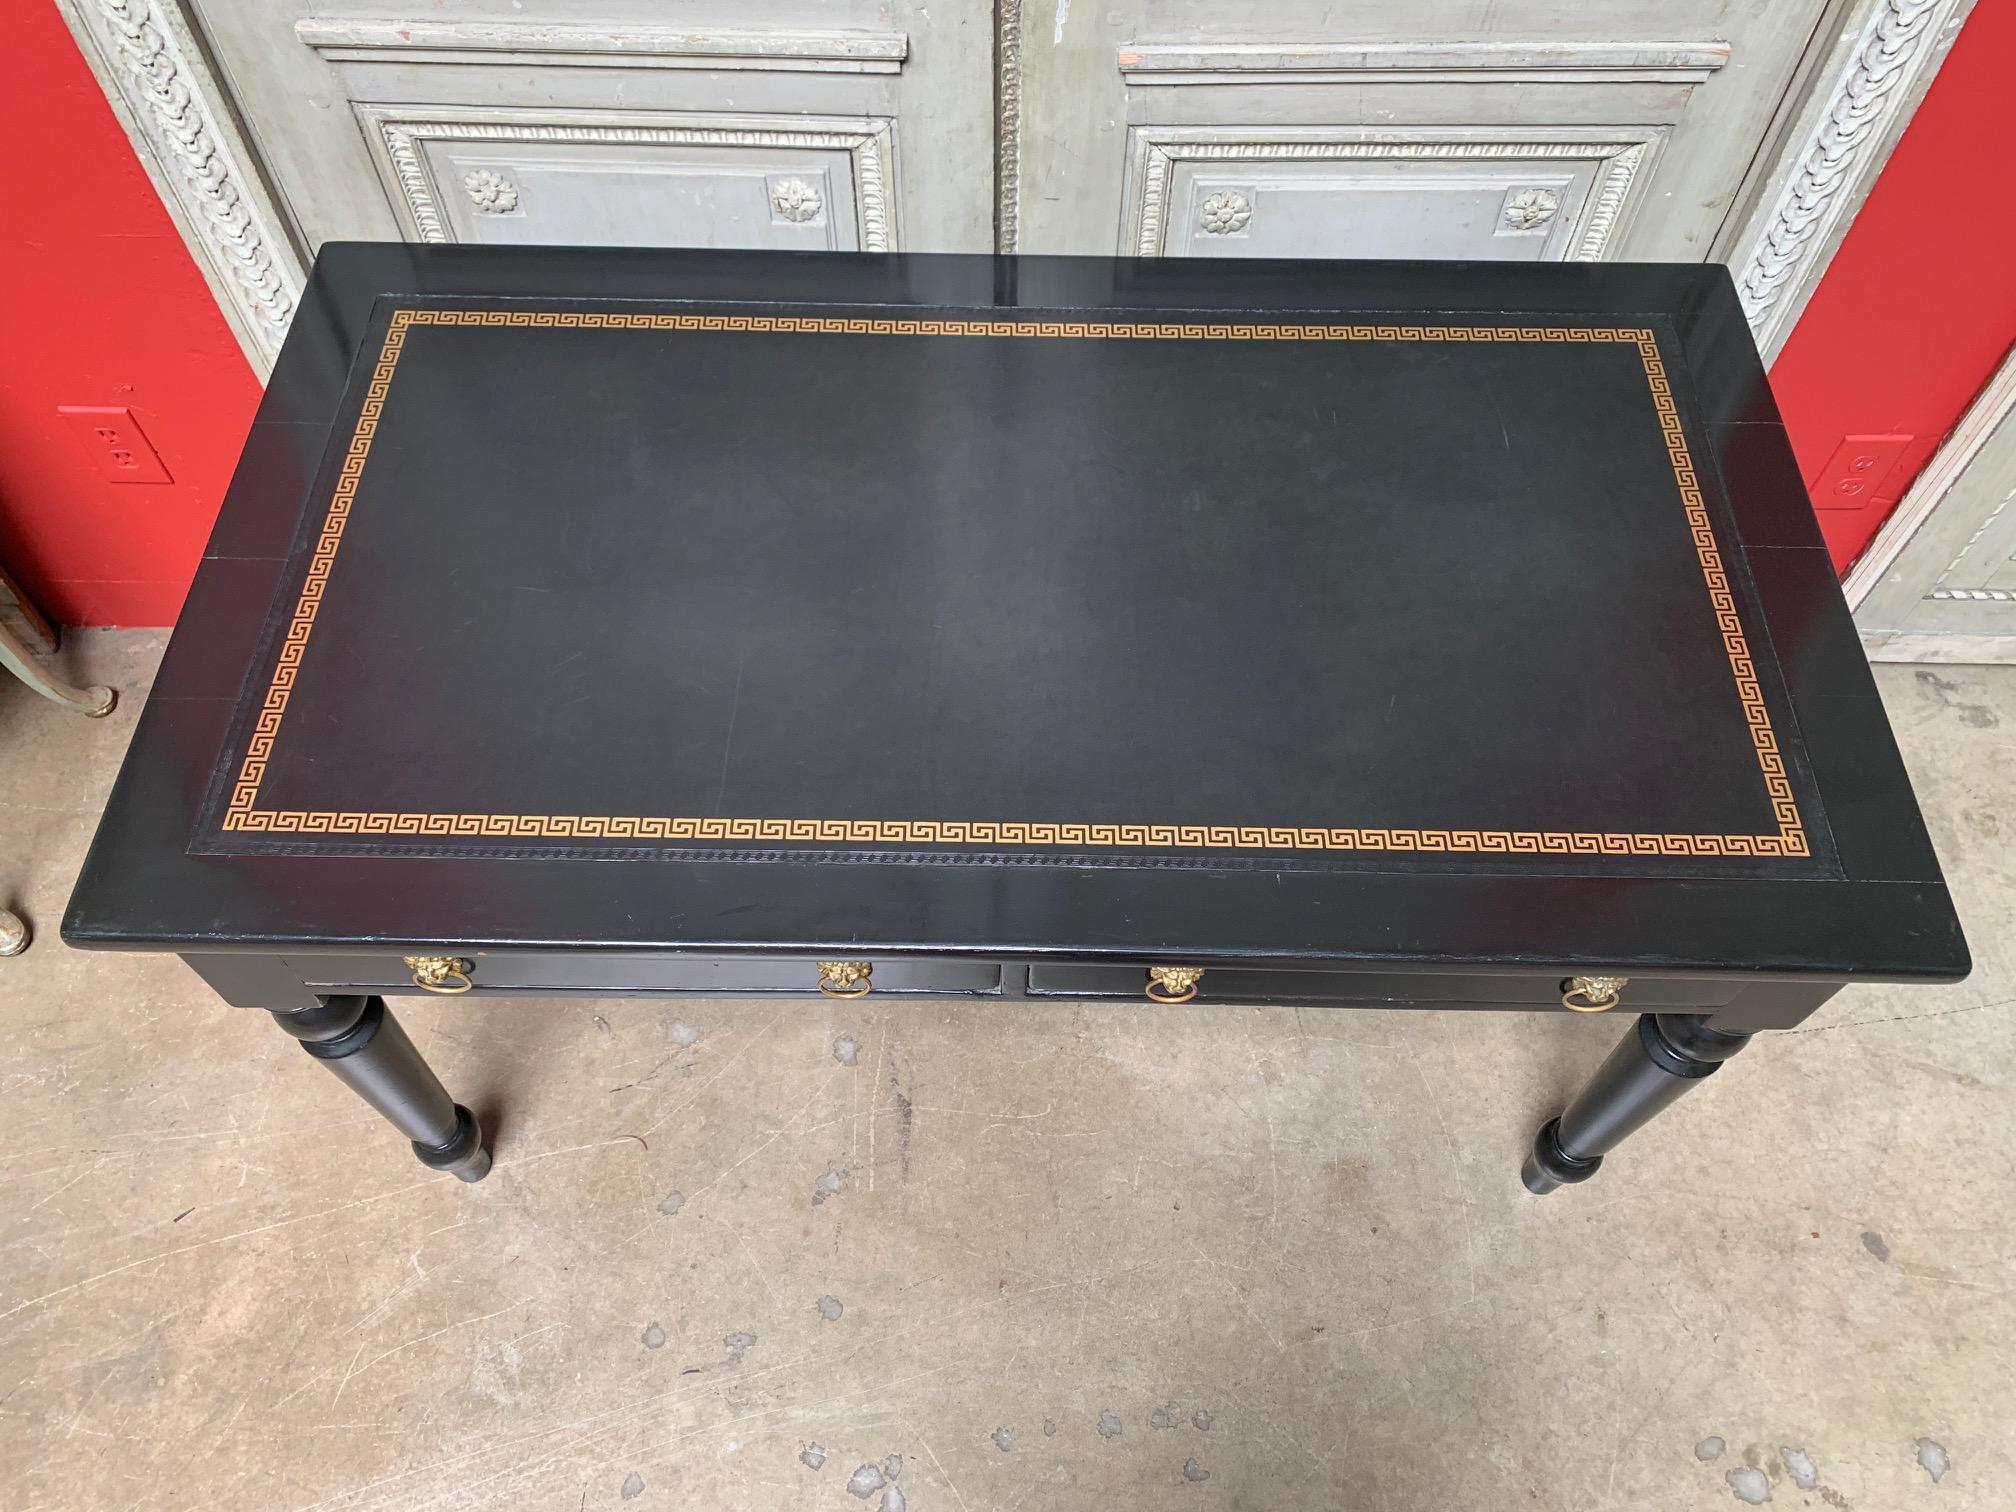 Victorian English Black Lacquered Desk with a Black and Gold Leather Top